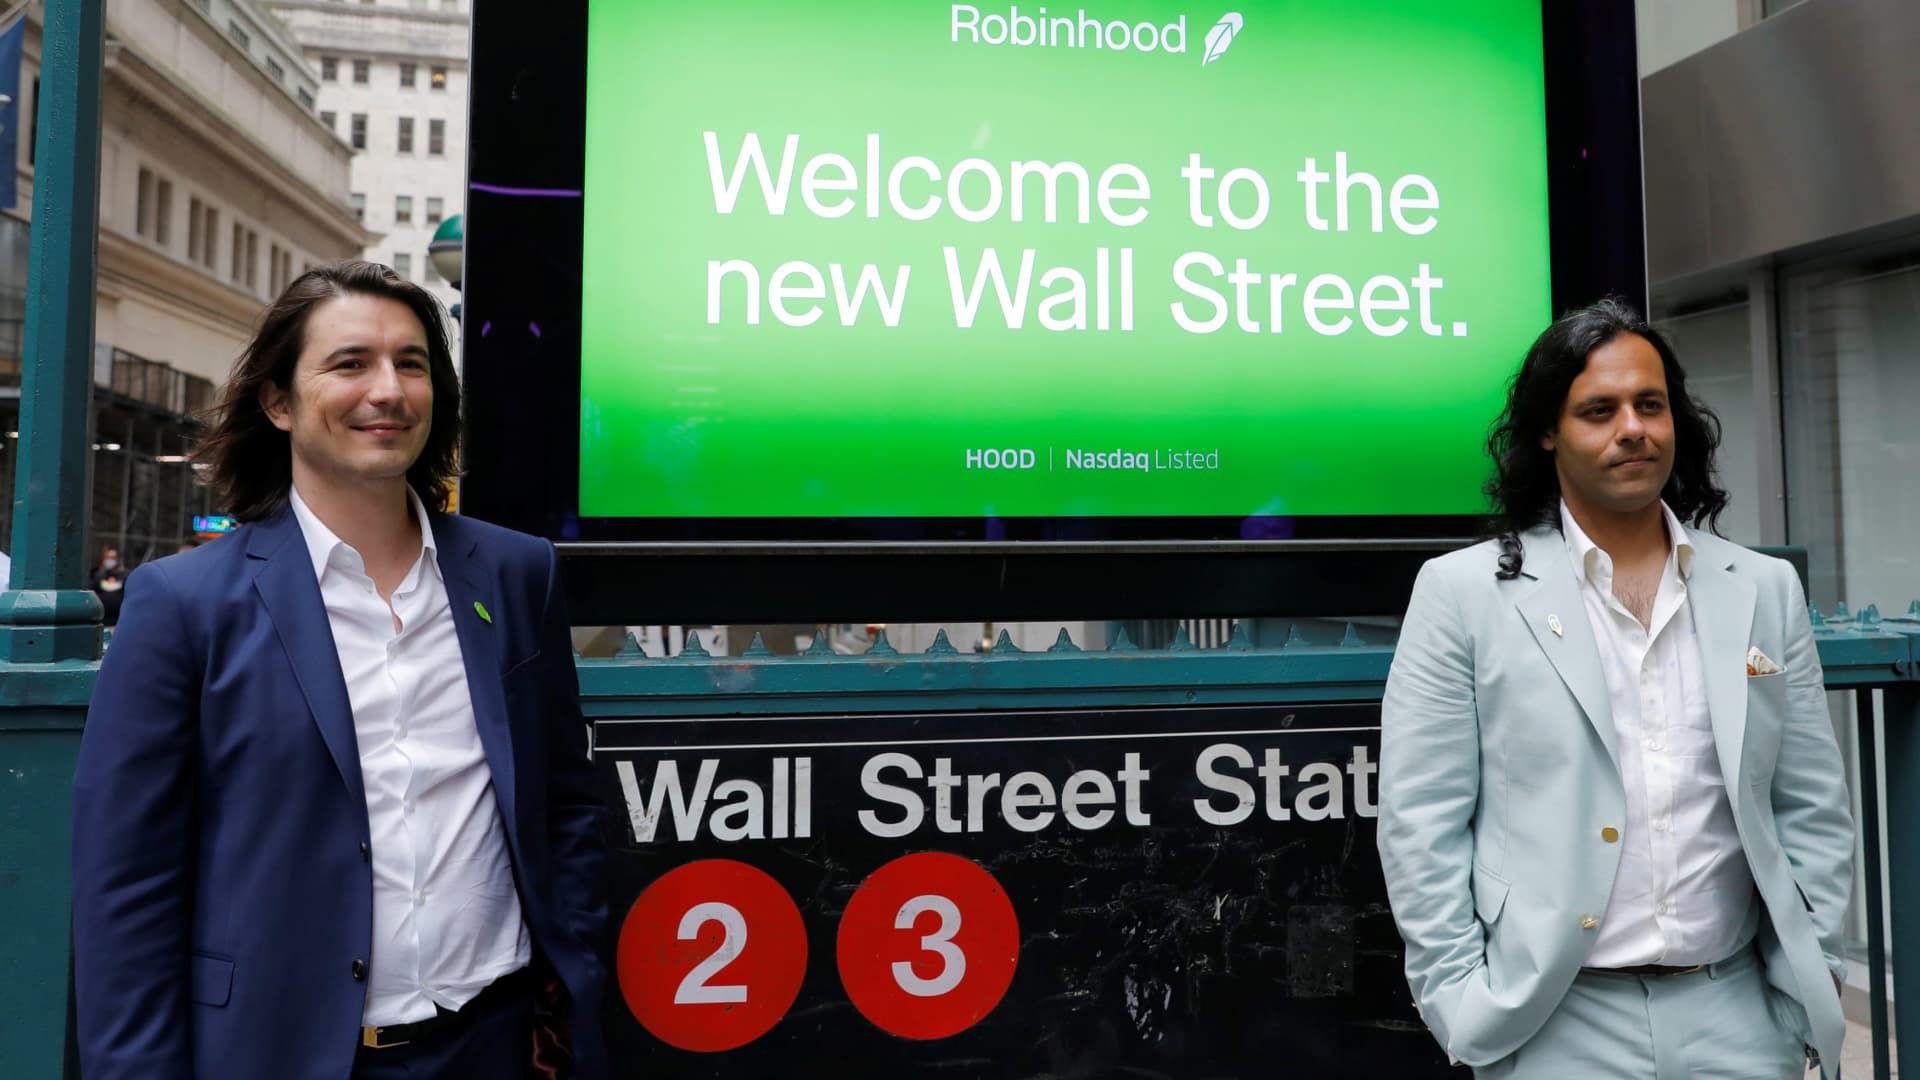 Robinhood Markets, Inc. CEO and co-founder Vlad Tenev and co-founder Baiju Bhatt pose with Robinhood signage on Wall Street after the company's IPO in New York City, U.S., July 29, 2021.